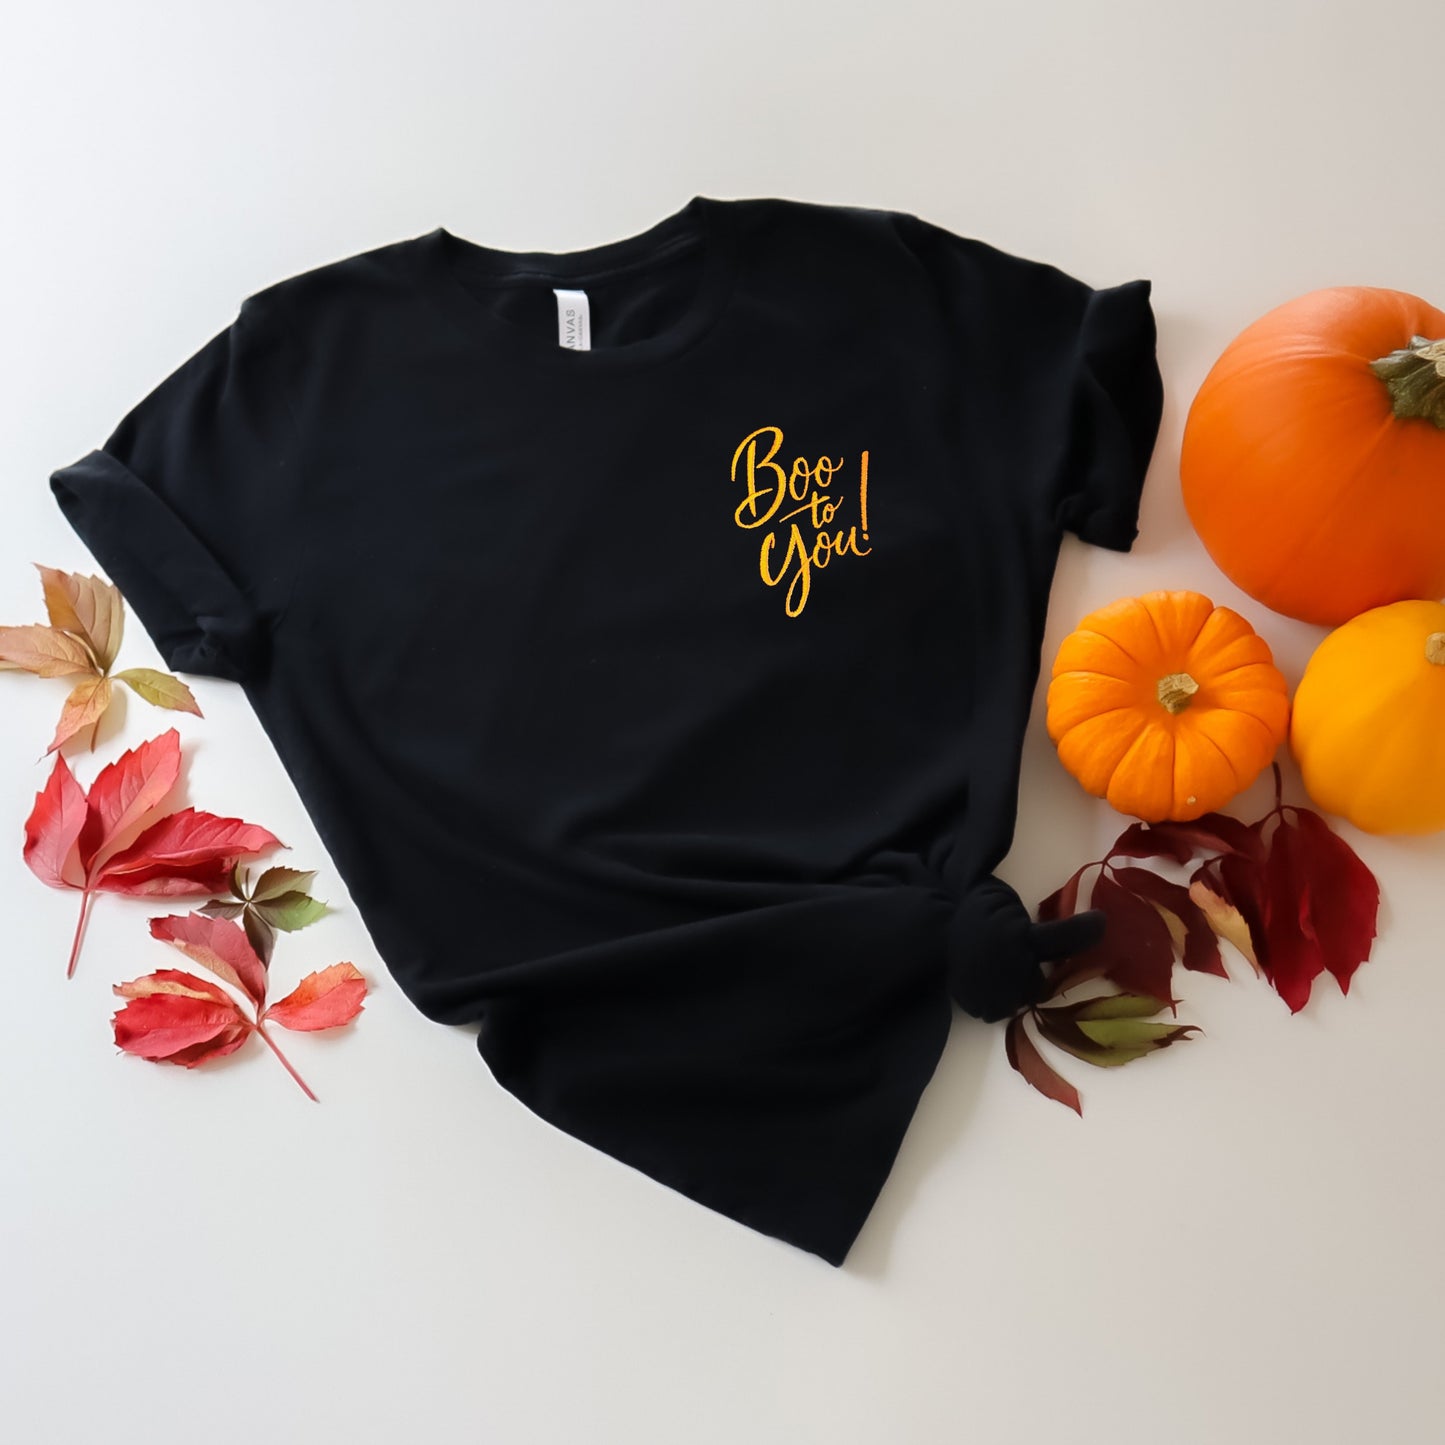 Boo To You! Black Embroidered Tee